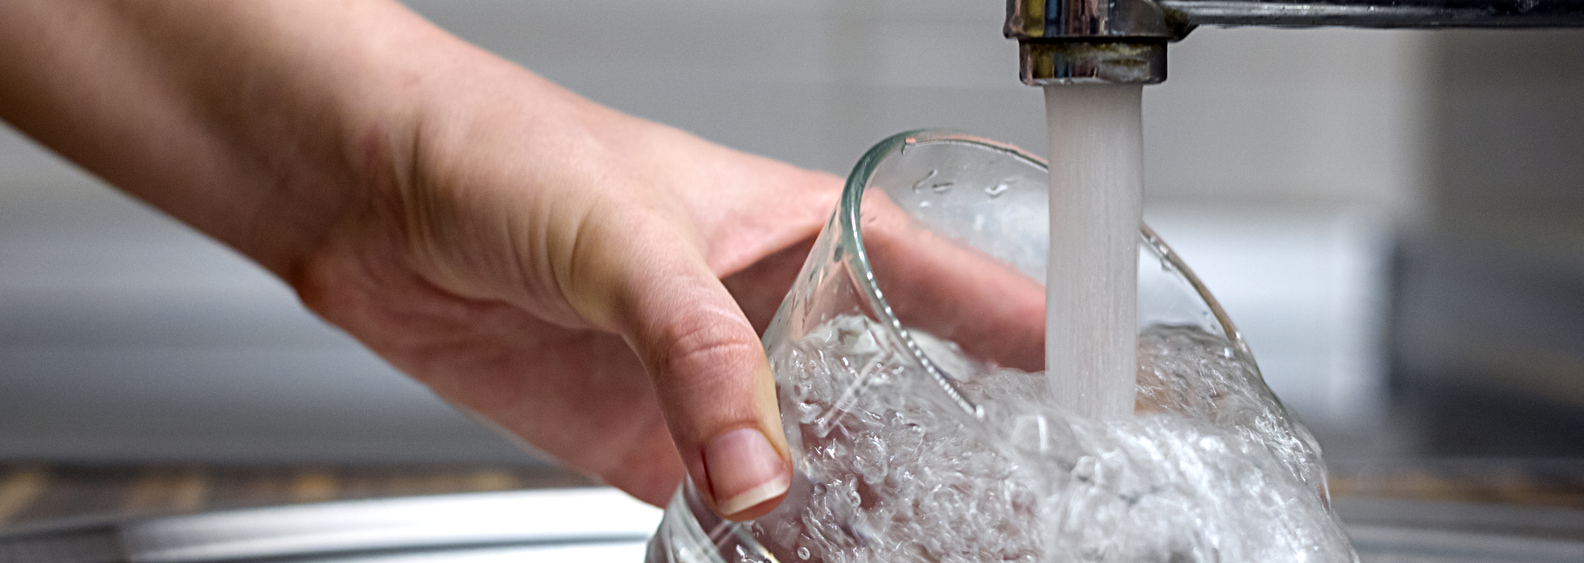 Female hands pouring water in glass cup from a kitchen faucet. Woman hand's filling the glass of water. Filling glass of water from stainless steel kitchen faucet